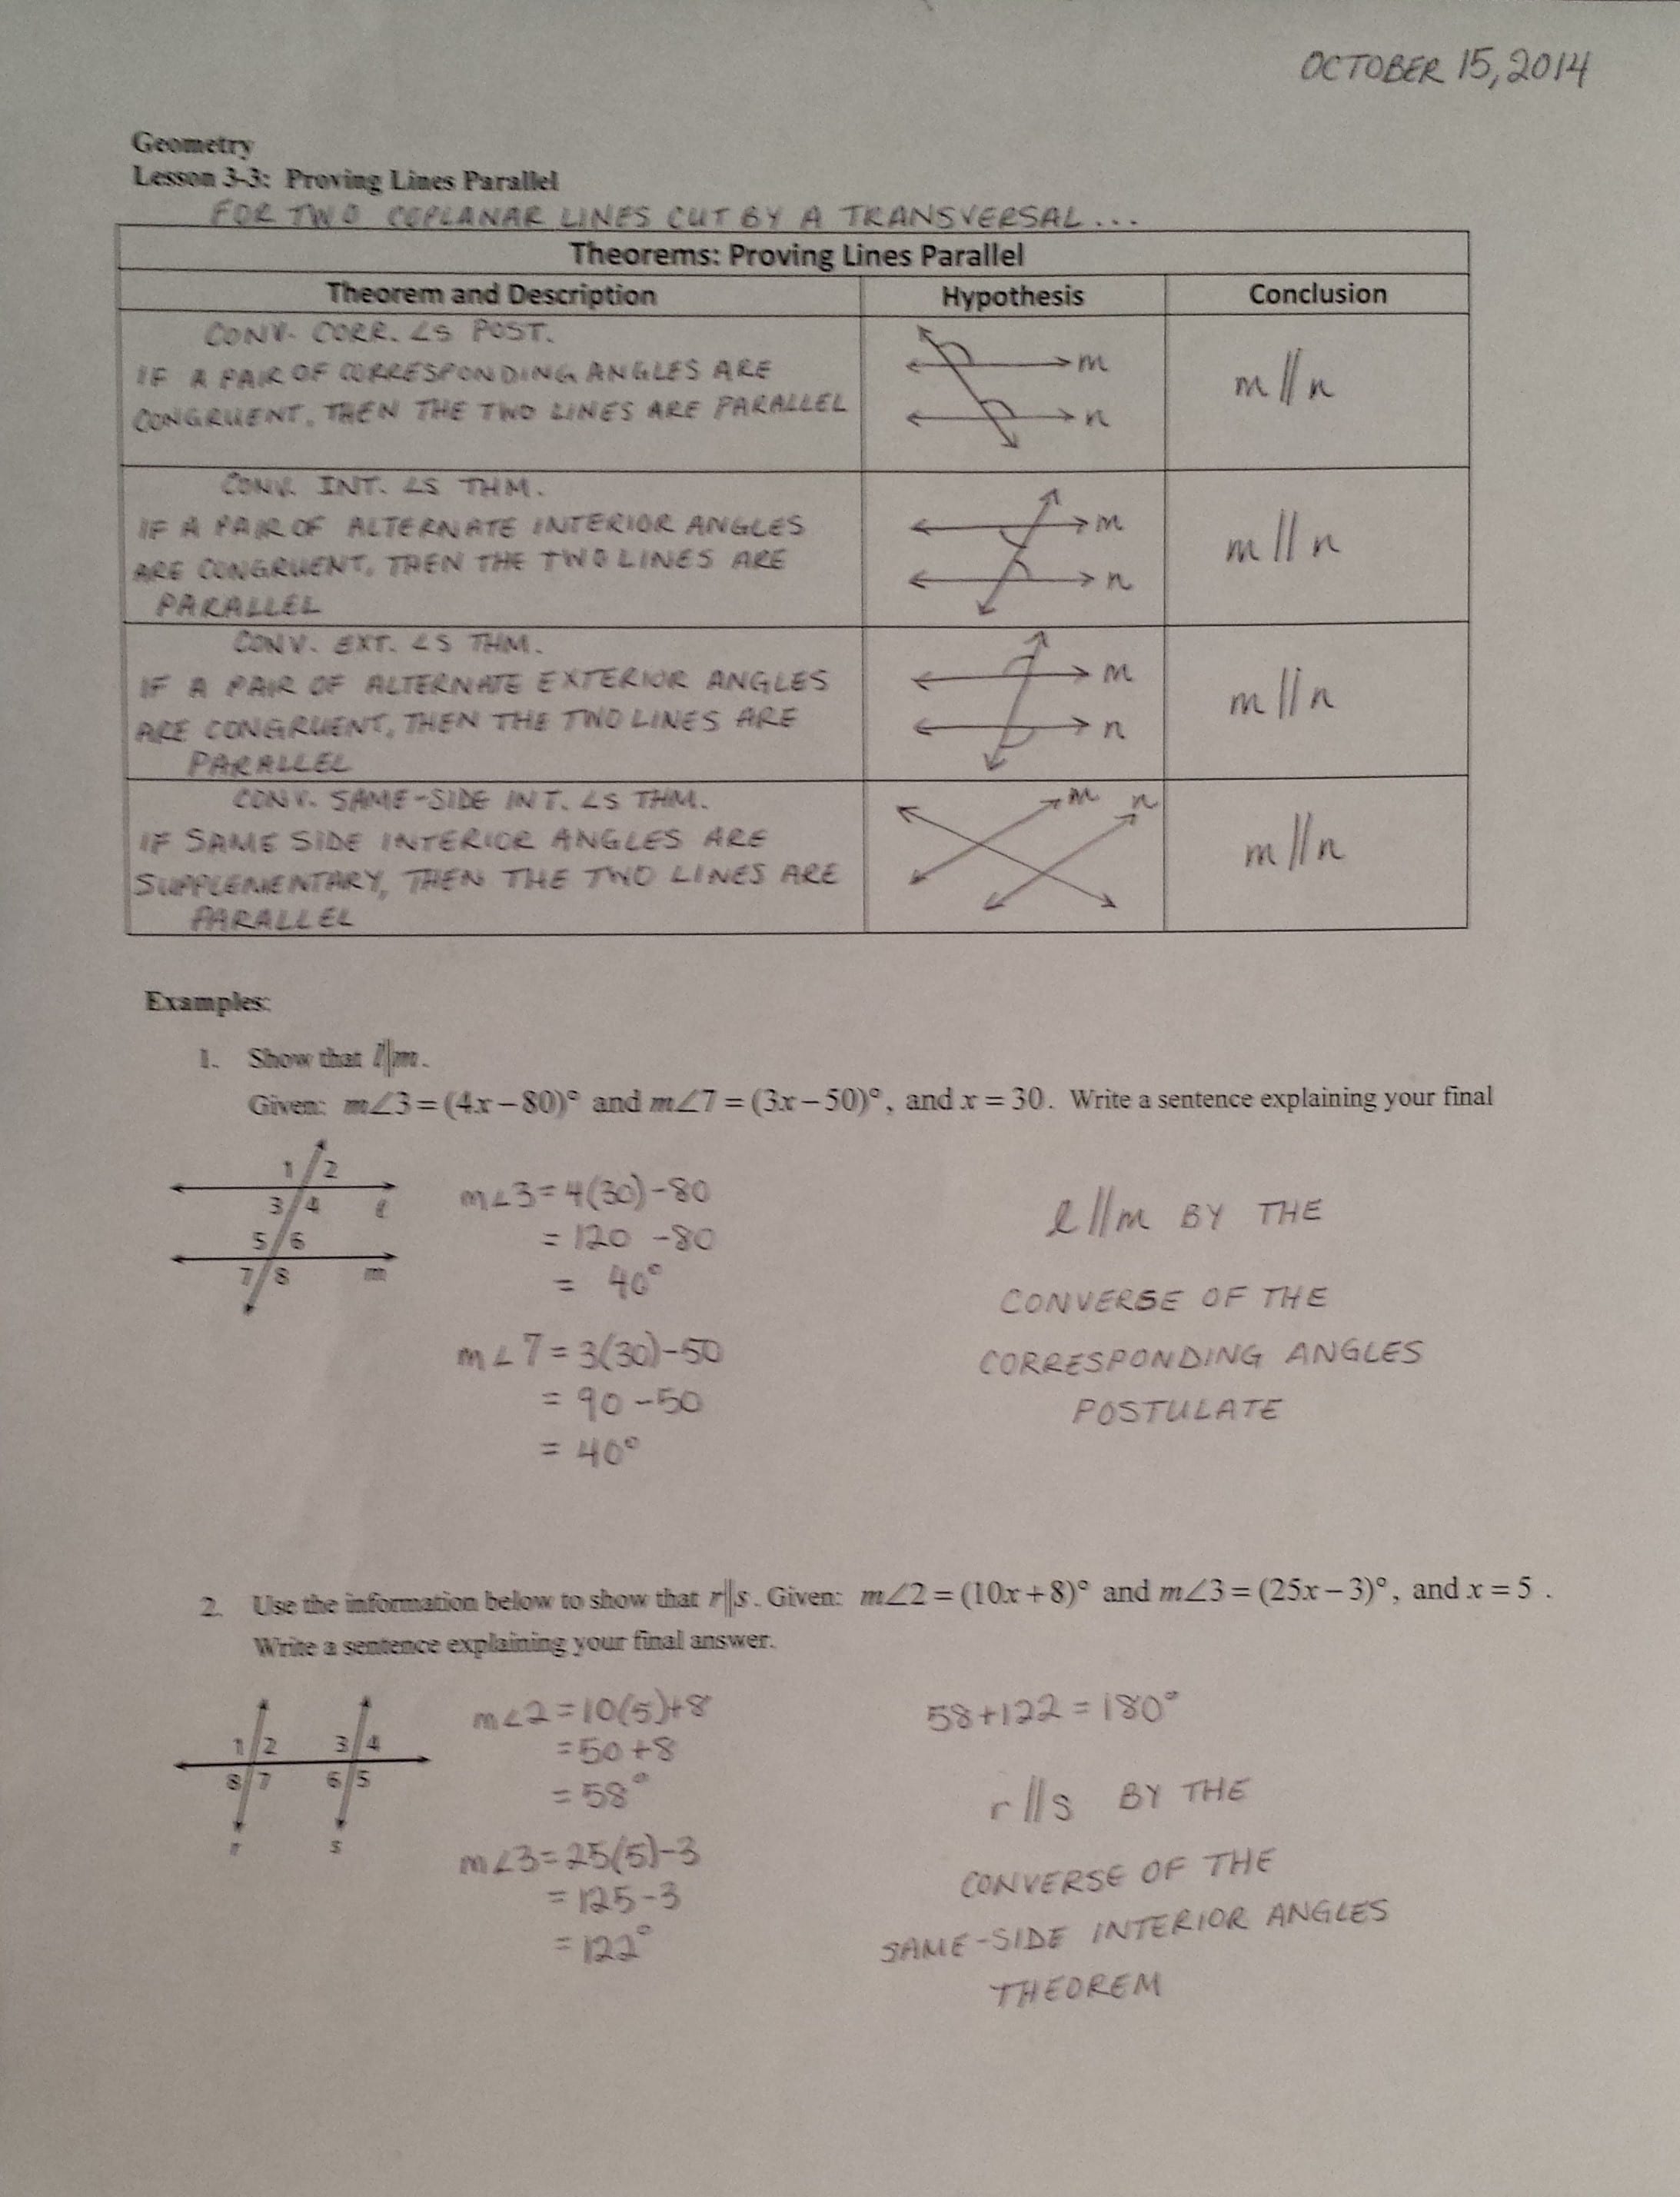 3 3 Proving Lines Parallel Worksheet Answers db excel com